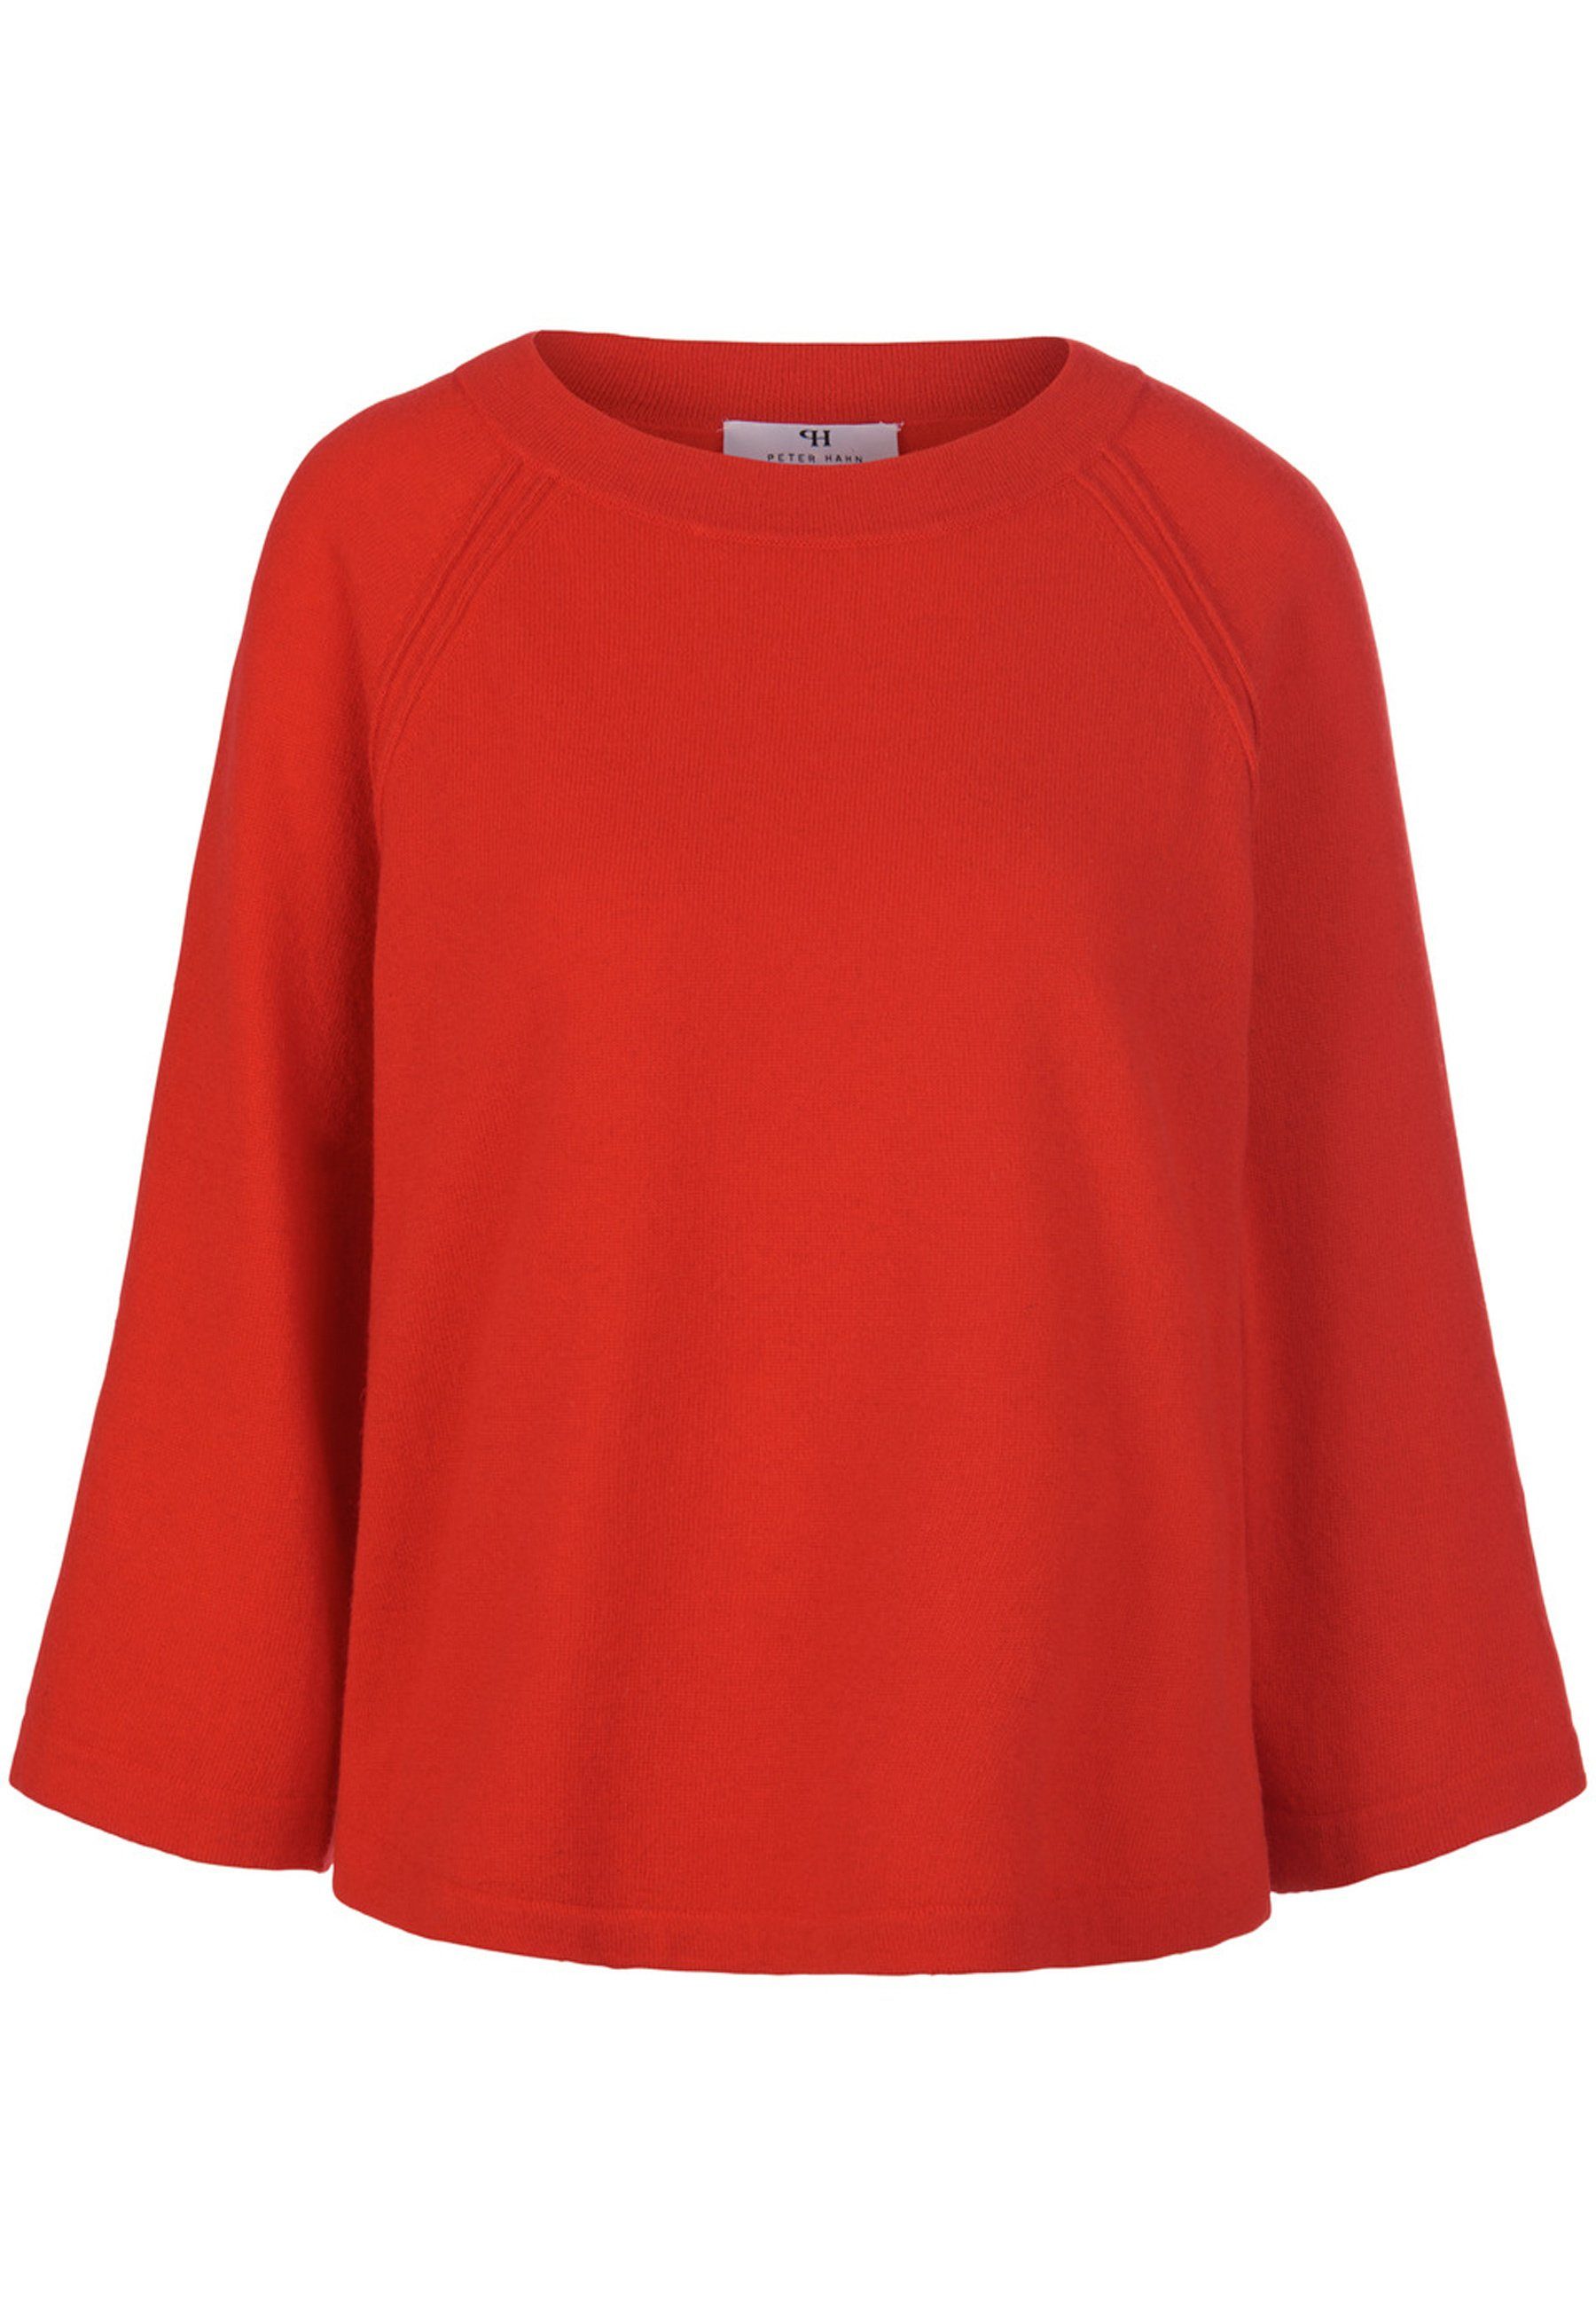 Peter Hahn New rot Wool Strickpullover